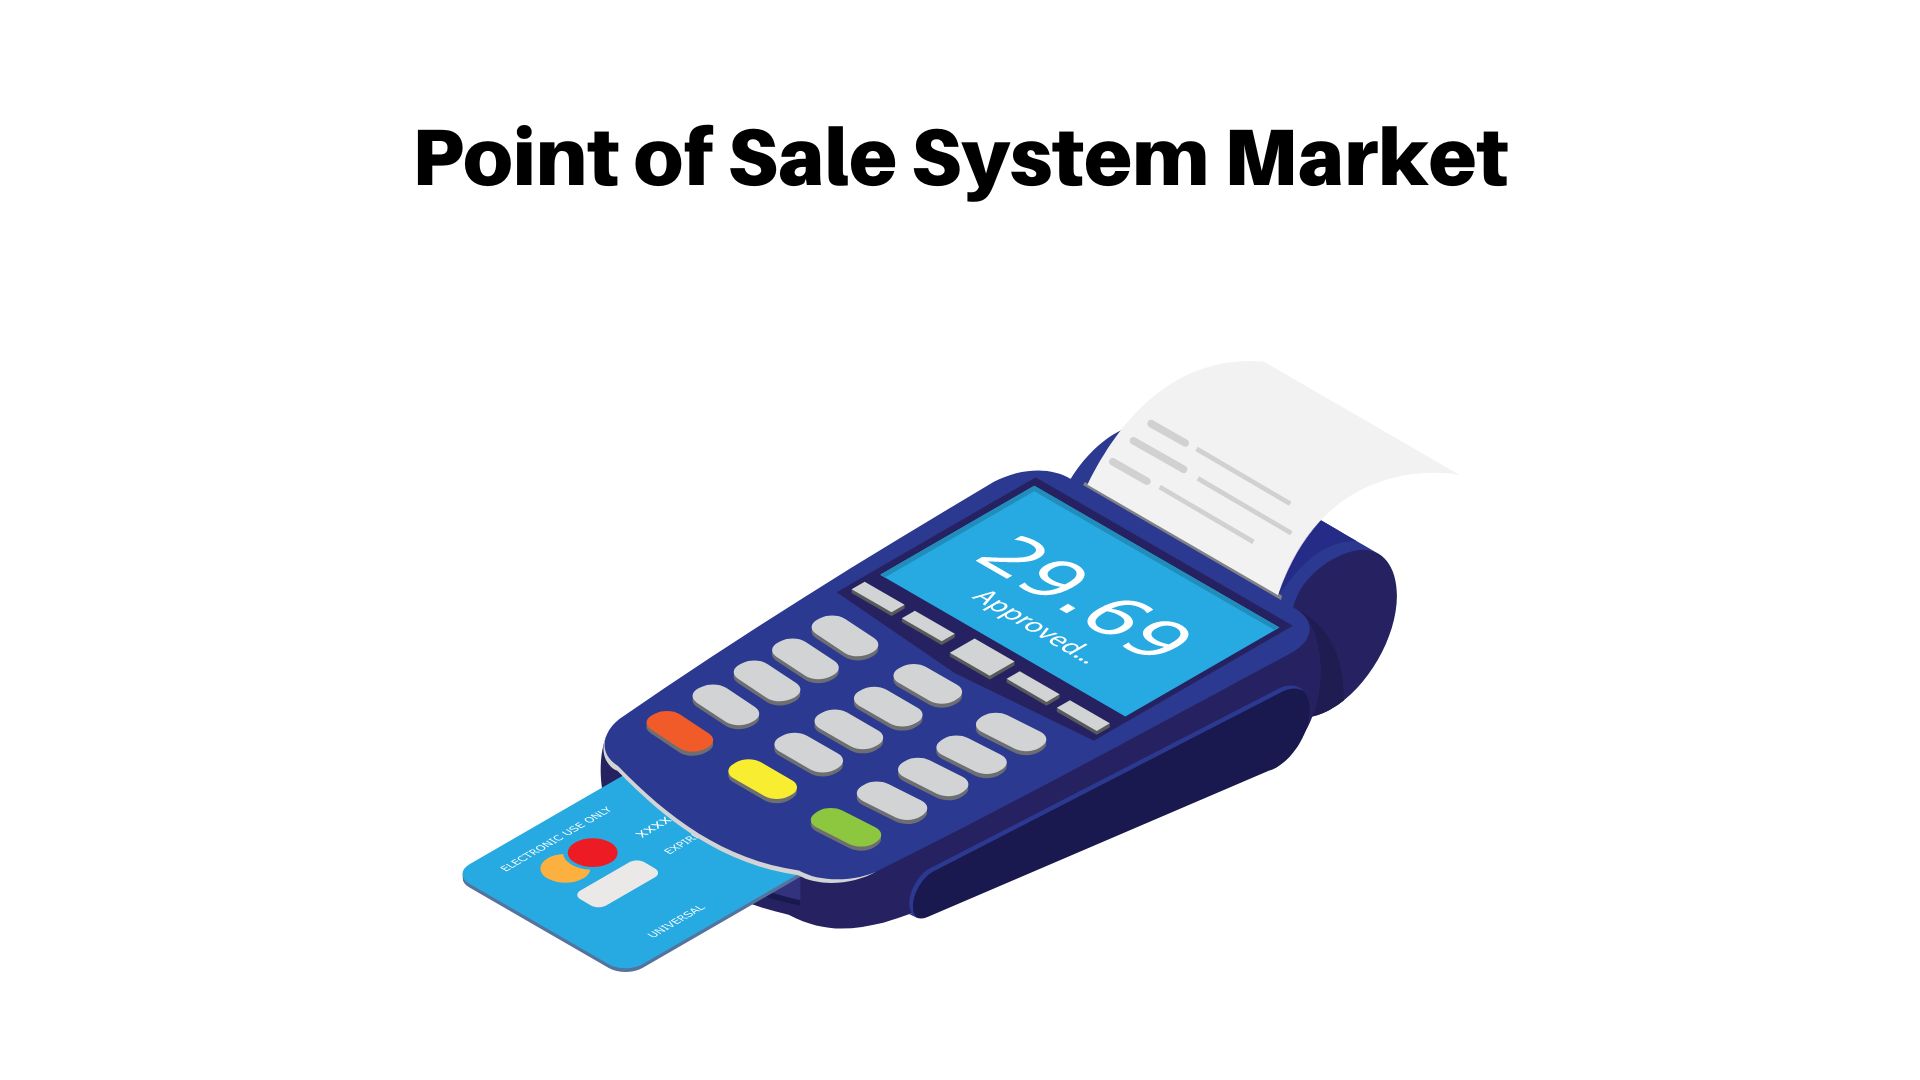 Global Point of Sale System Market Size USD 46 bn | Vendors Analysis (Ingenico, Verifone) By 2032